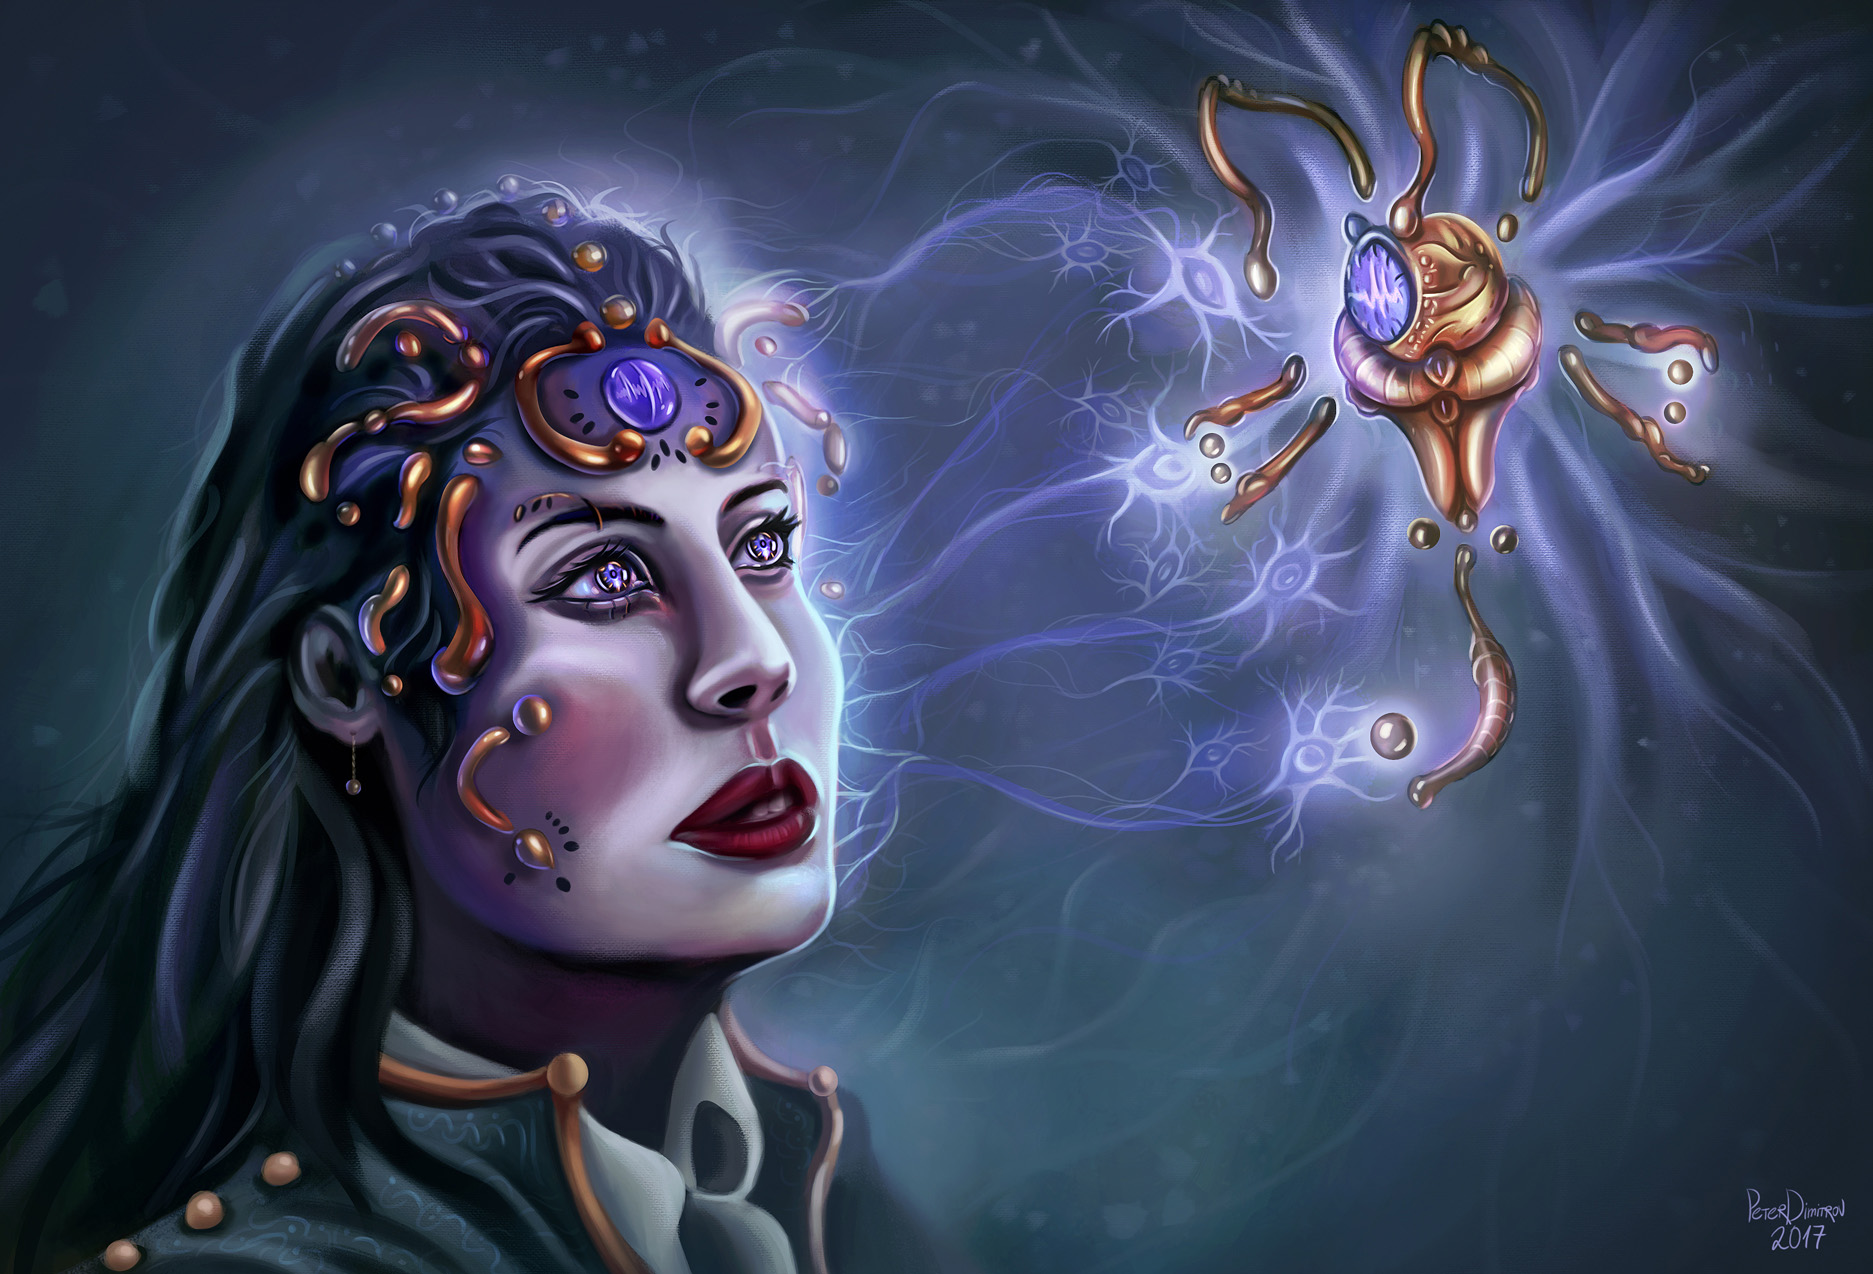 The painting “Drone of Clouds and Minds”. To the left is a close up view of a woman. She has intricate headpiece in orange metals. Her eyes glow in deep purples, the same purples she appears to have a device on her forehead in. She is looking towards an intricate, curious metal device. From her face, towards that device, clouds and energy extends. That energy appears in the shape of neural pathways.